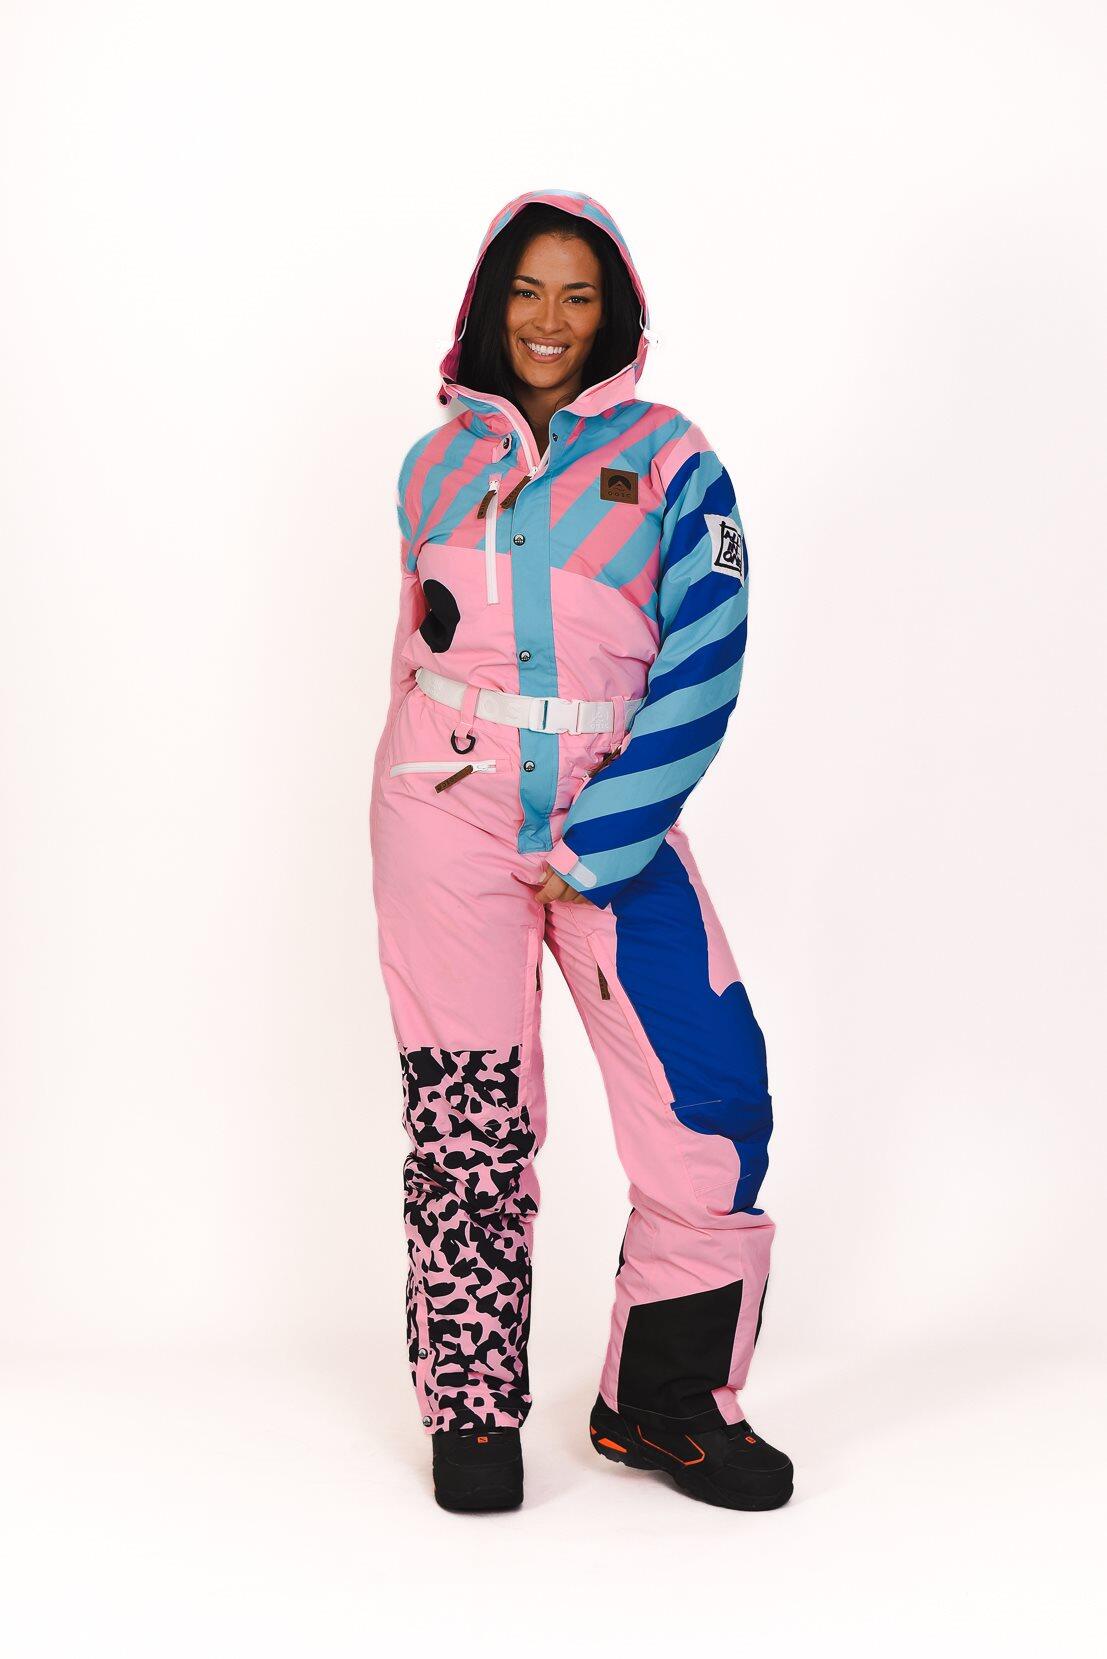 OOSC Penfold in Pink Ski Suit - Women's Curved